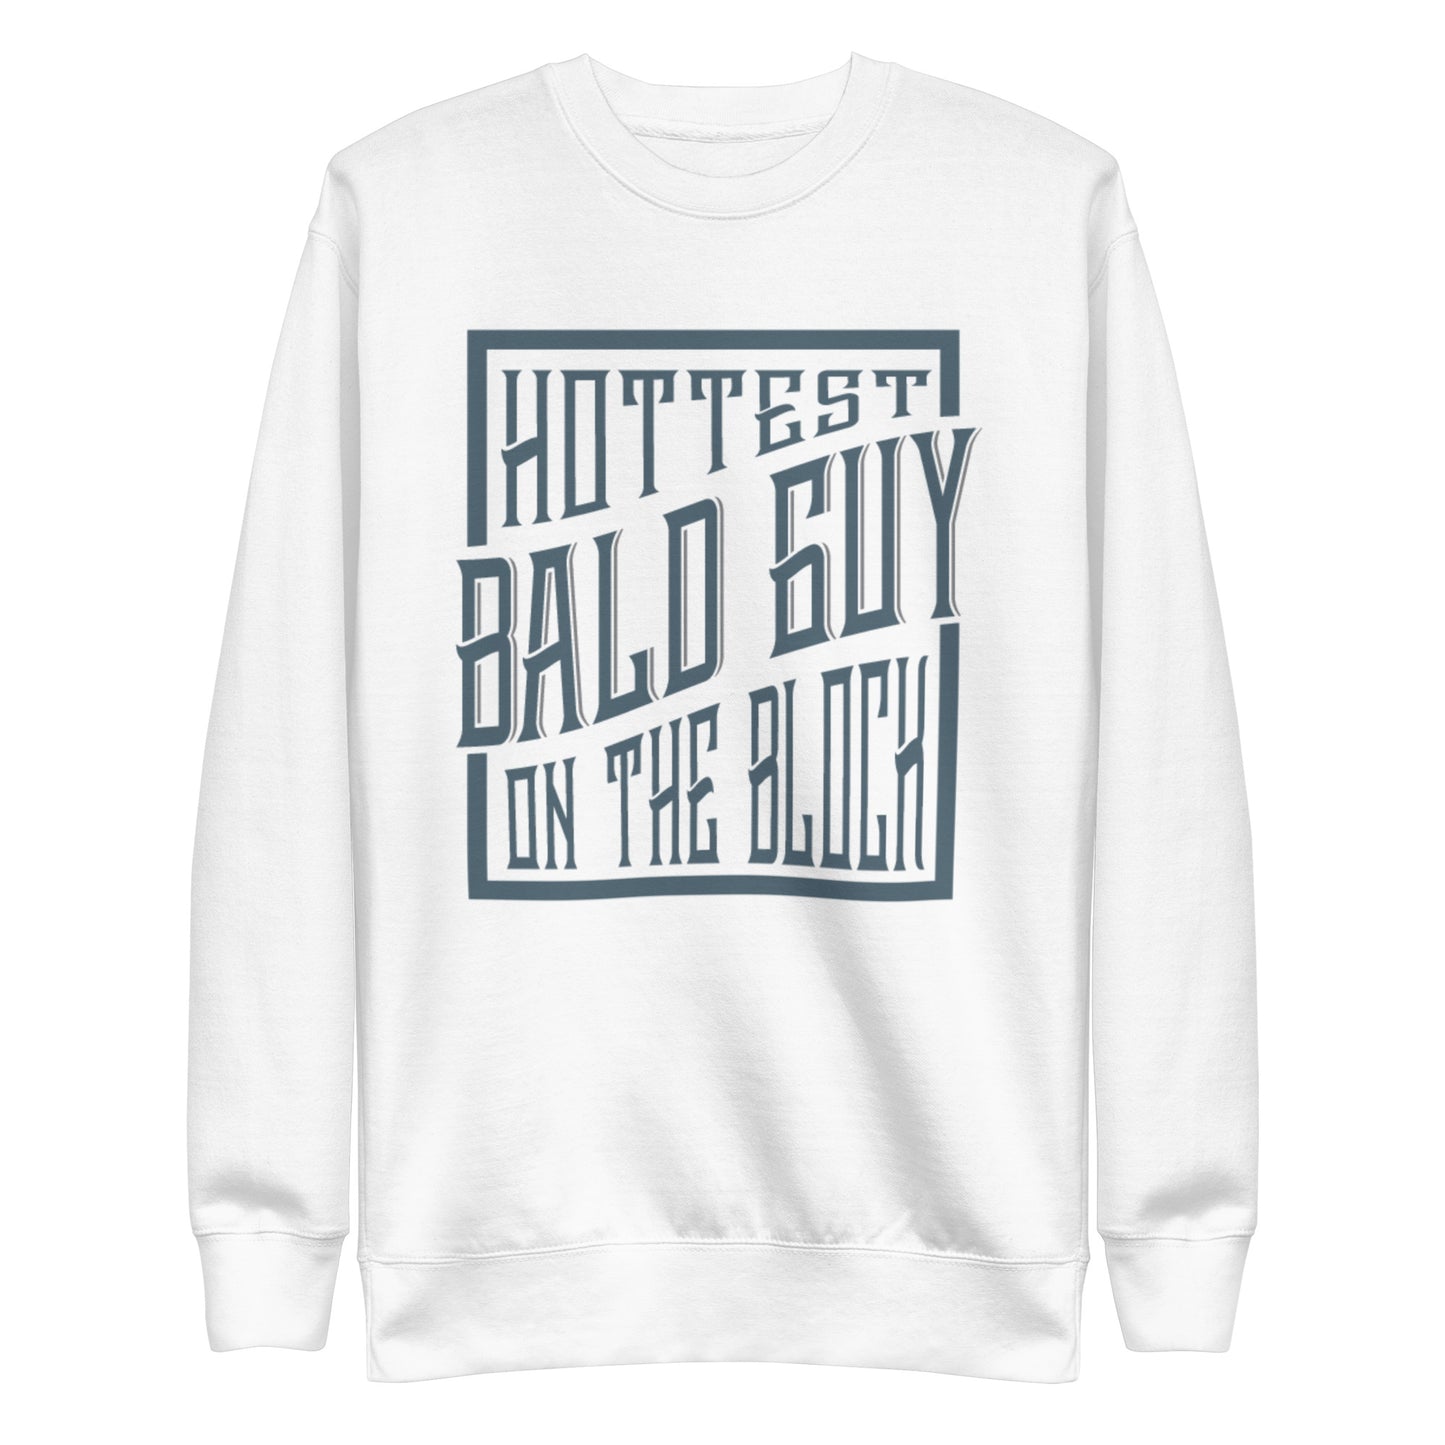 Stay warm with our best-selling Hottest Bald Guy sweatshirt - the ultimate combination of comfort and fashion!